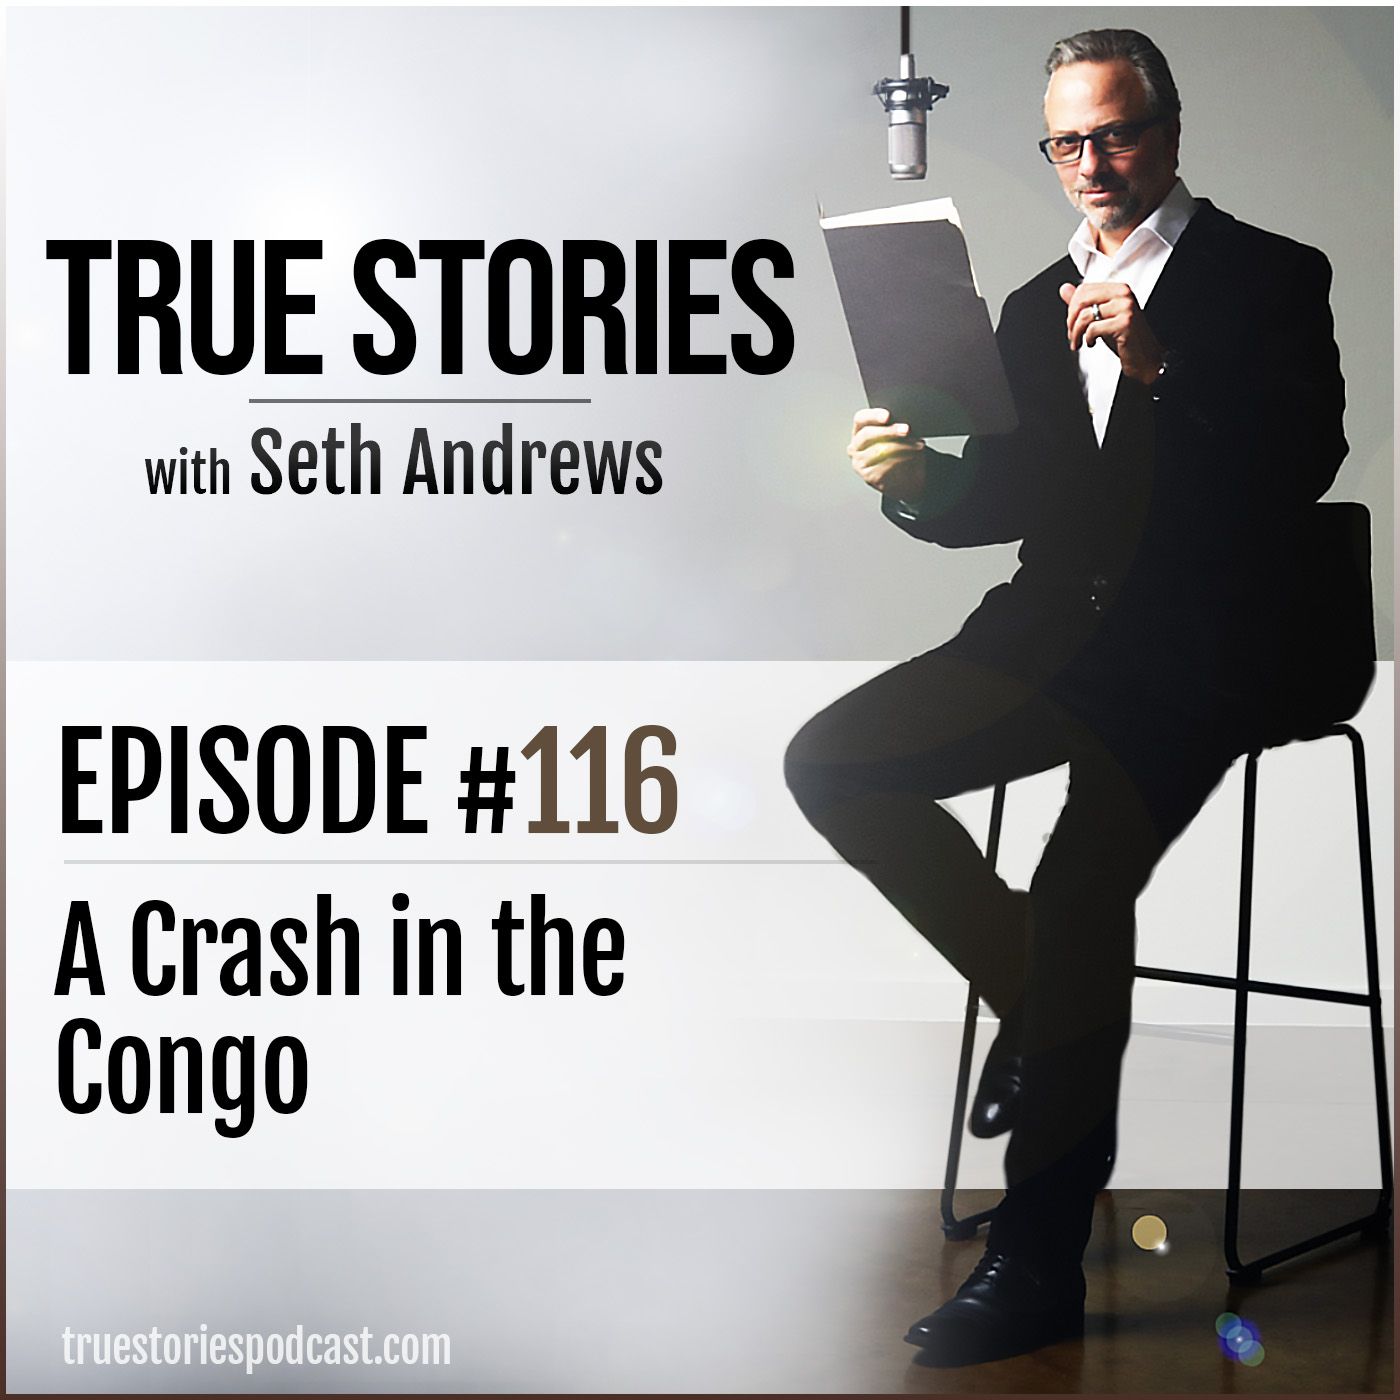 True Stories #116 - A Crash in the Congo